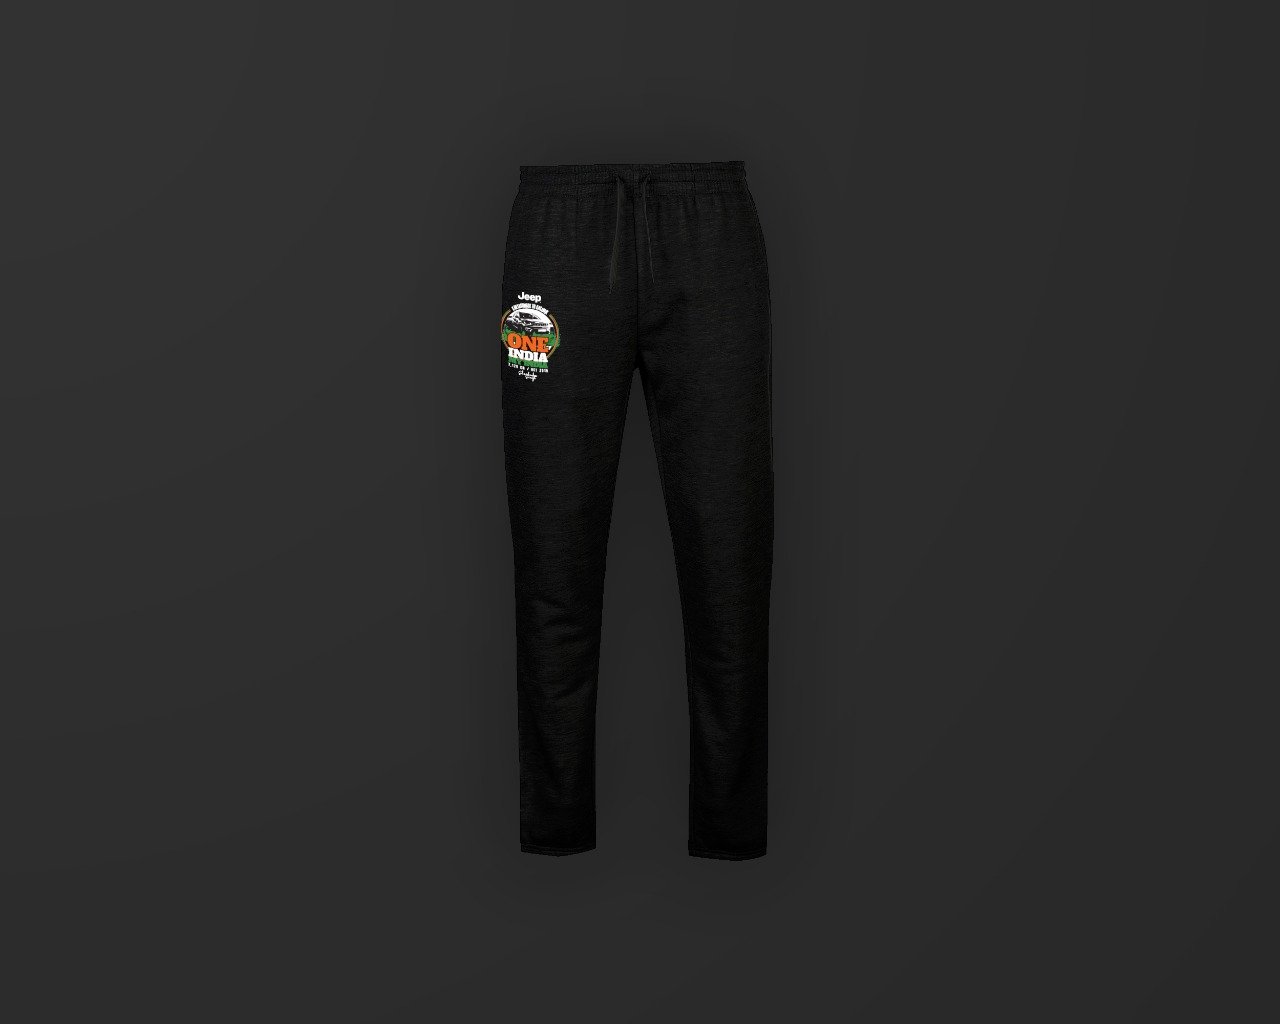 One India pants front